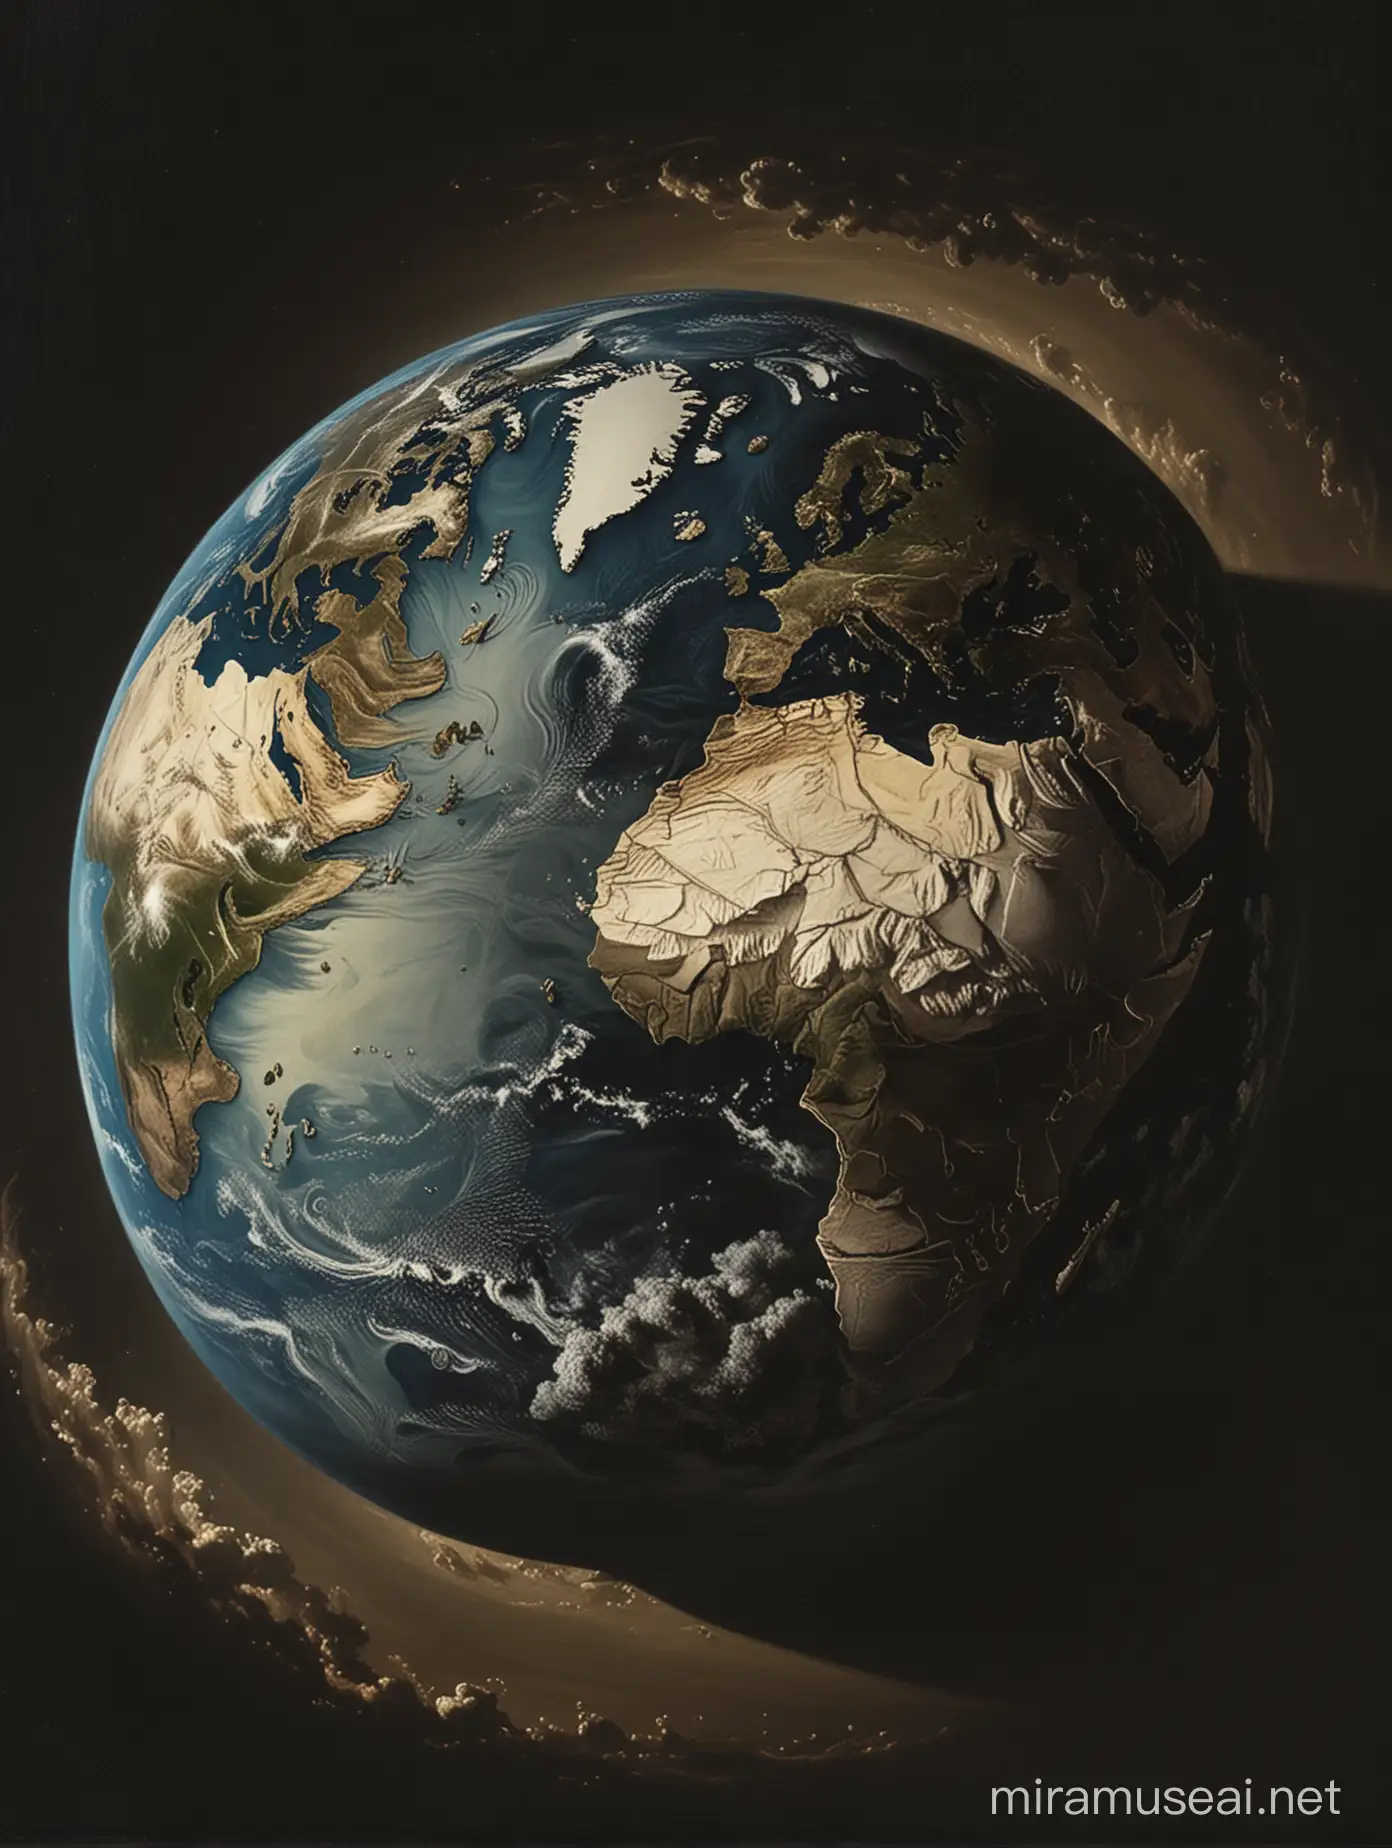 A view of the Earth taken from the Moon in the style of 1600 century painter Caravaggio.